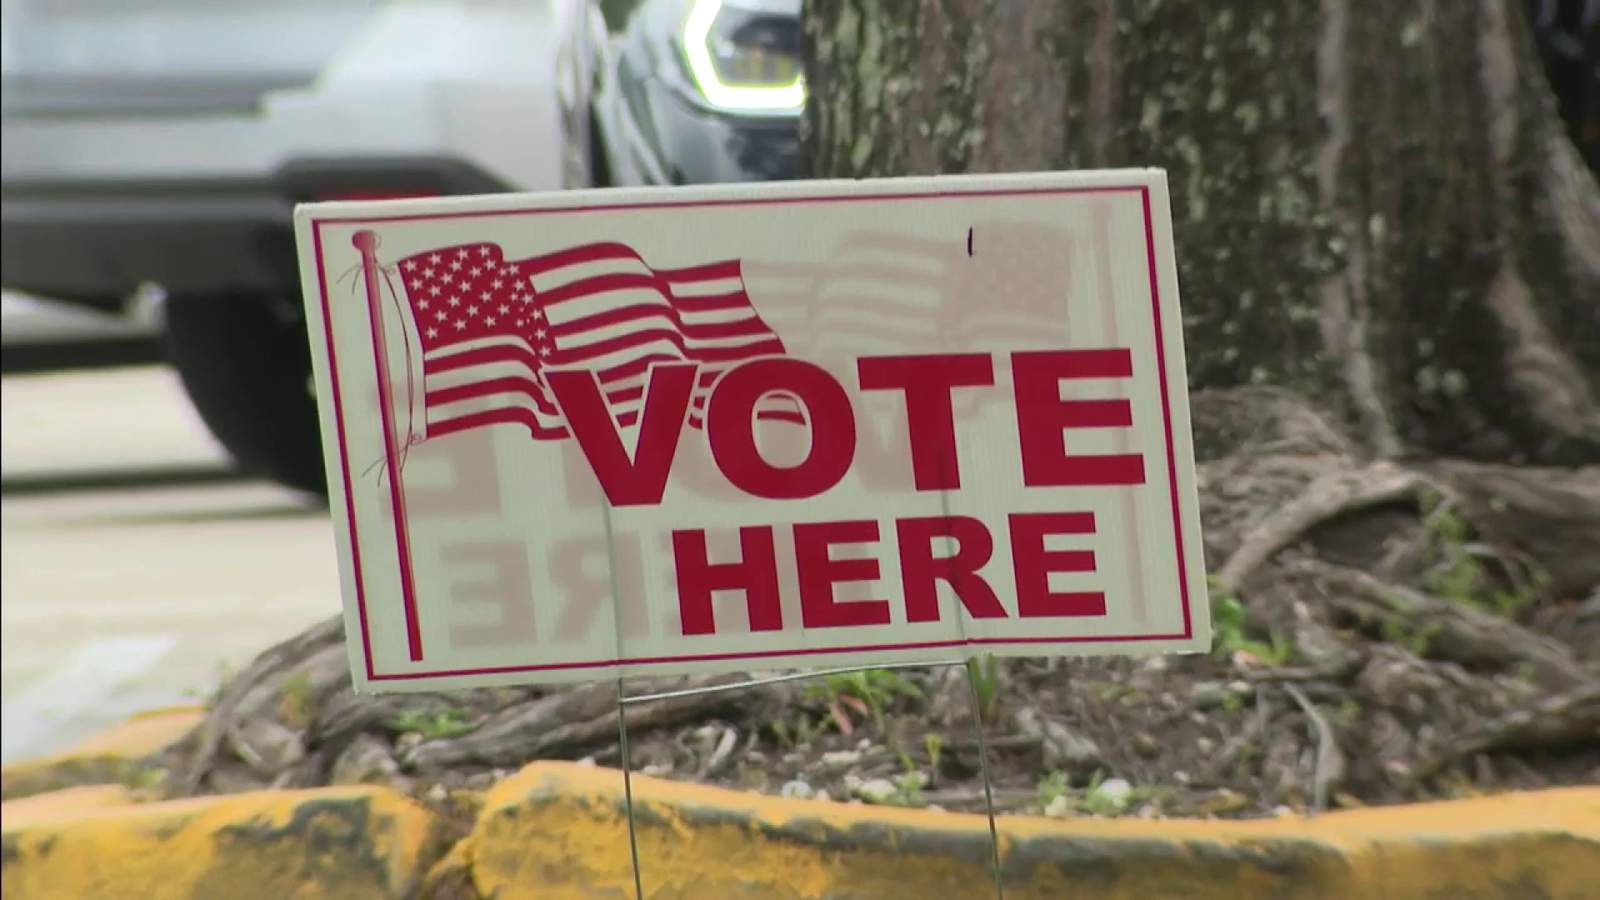 State of Emergency Tour stops in Orlando to push voter turnout